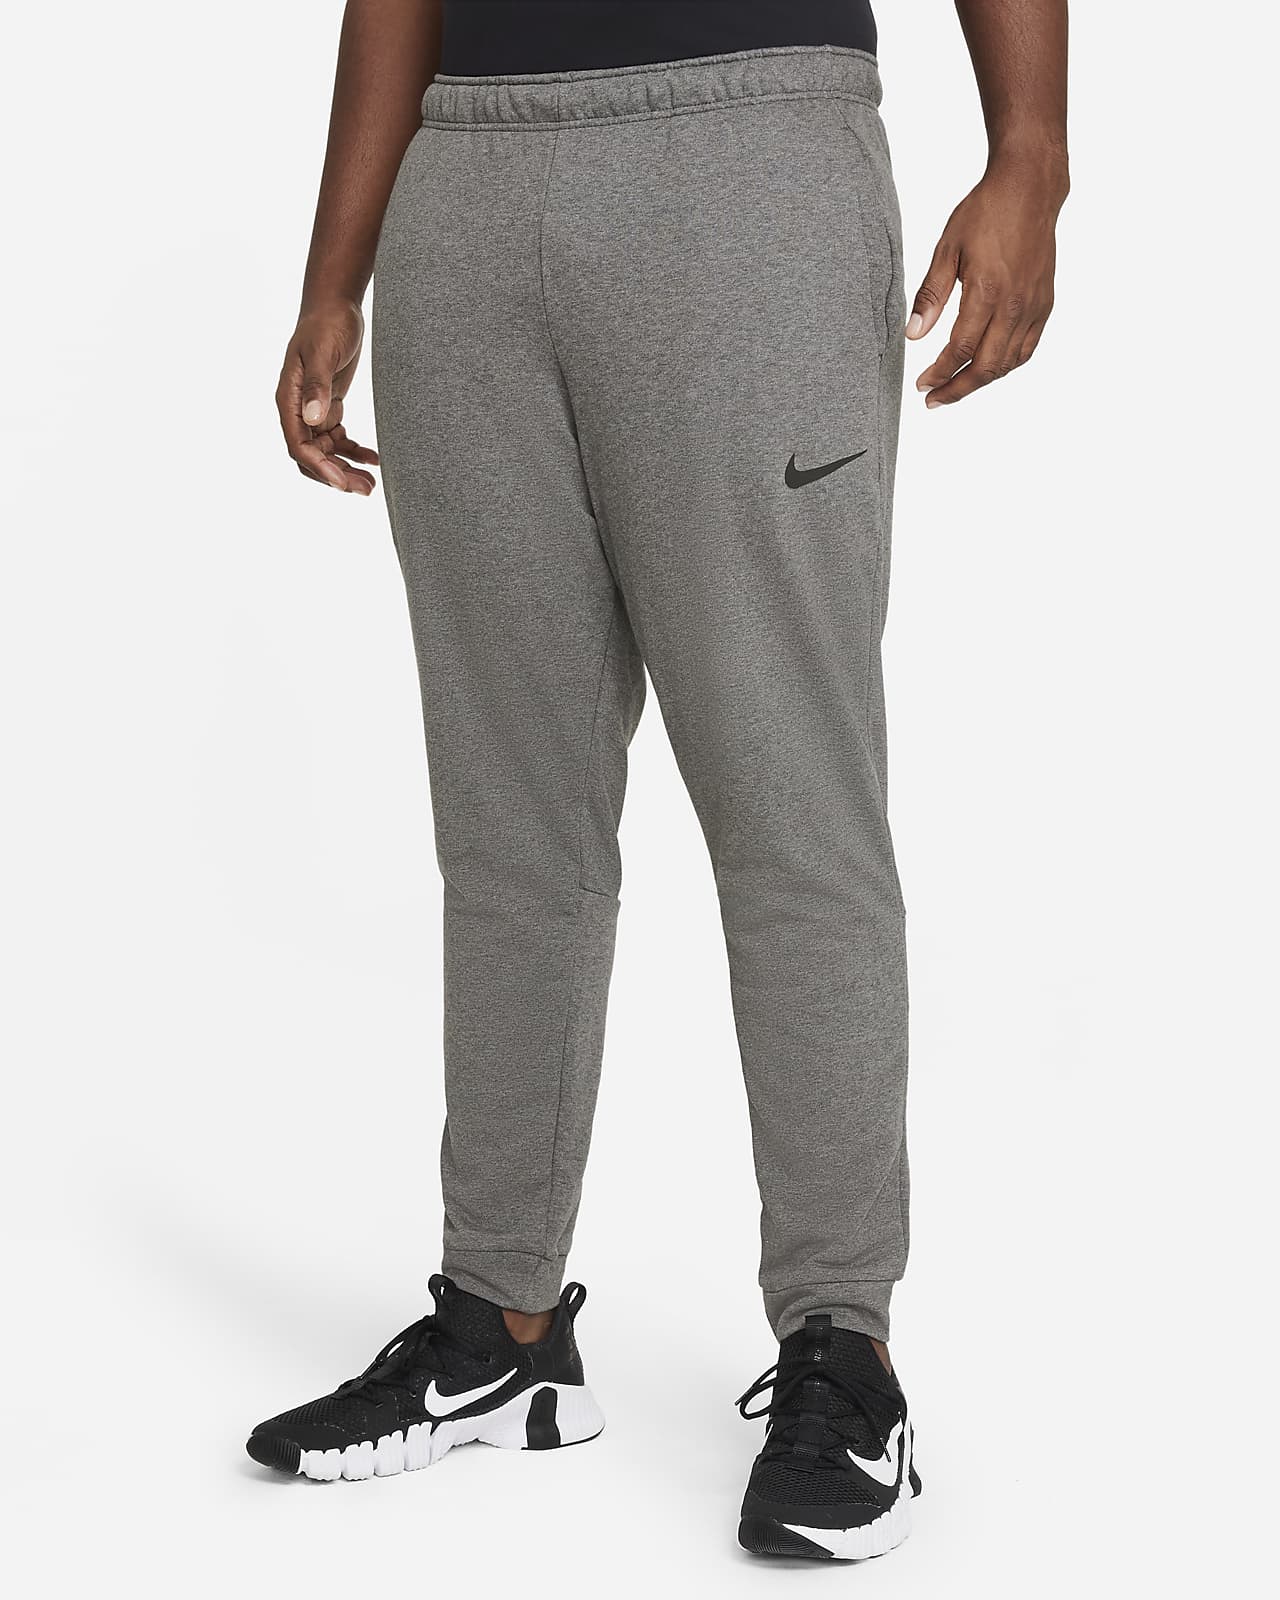 Nike essentials loose fit sweatpant in gray - ShopStyle Plus Size